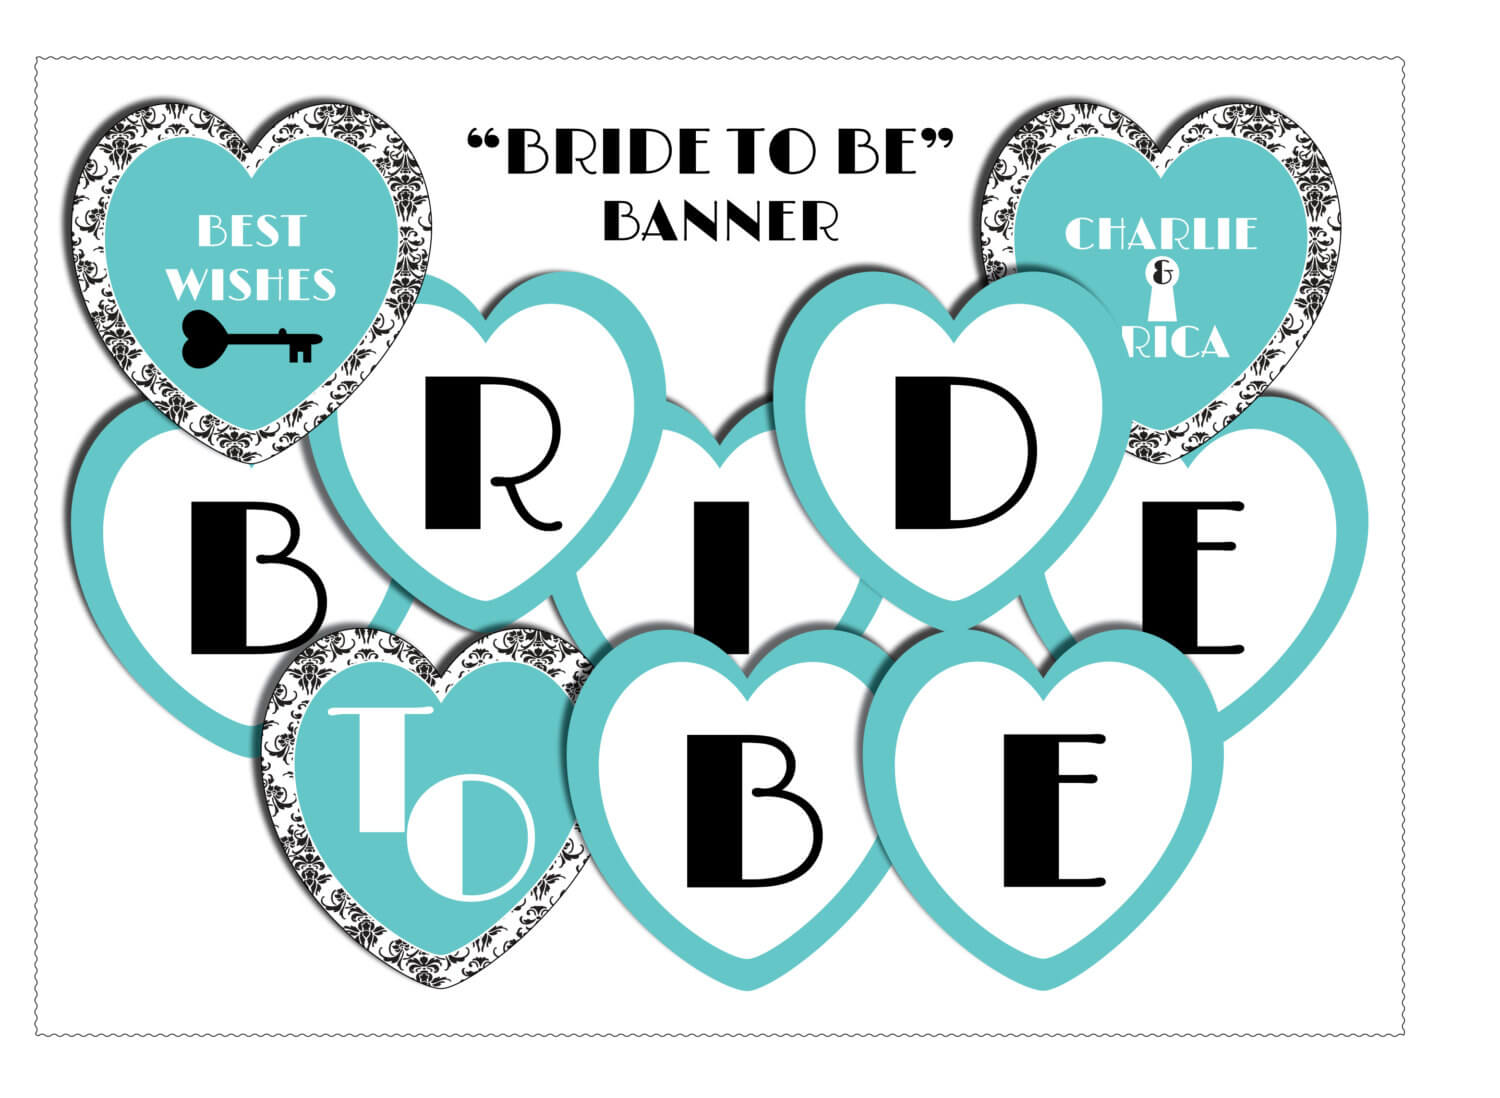 From Miss To Mrs Banner Template – Best Banner Design 2018 In Bridal Shower Banner Template